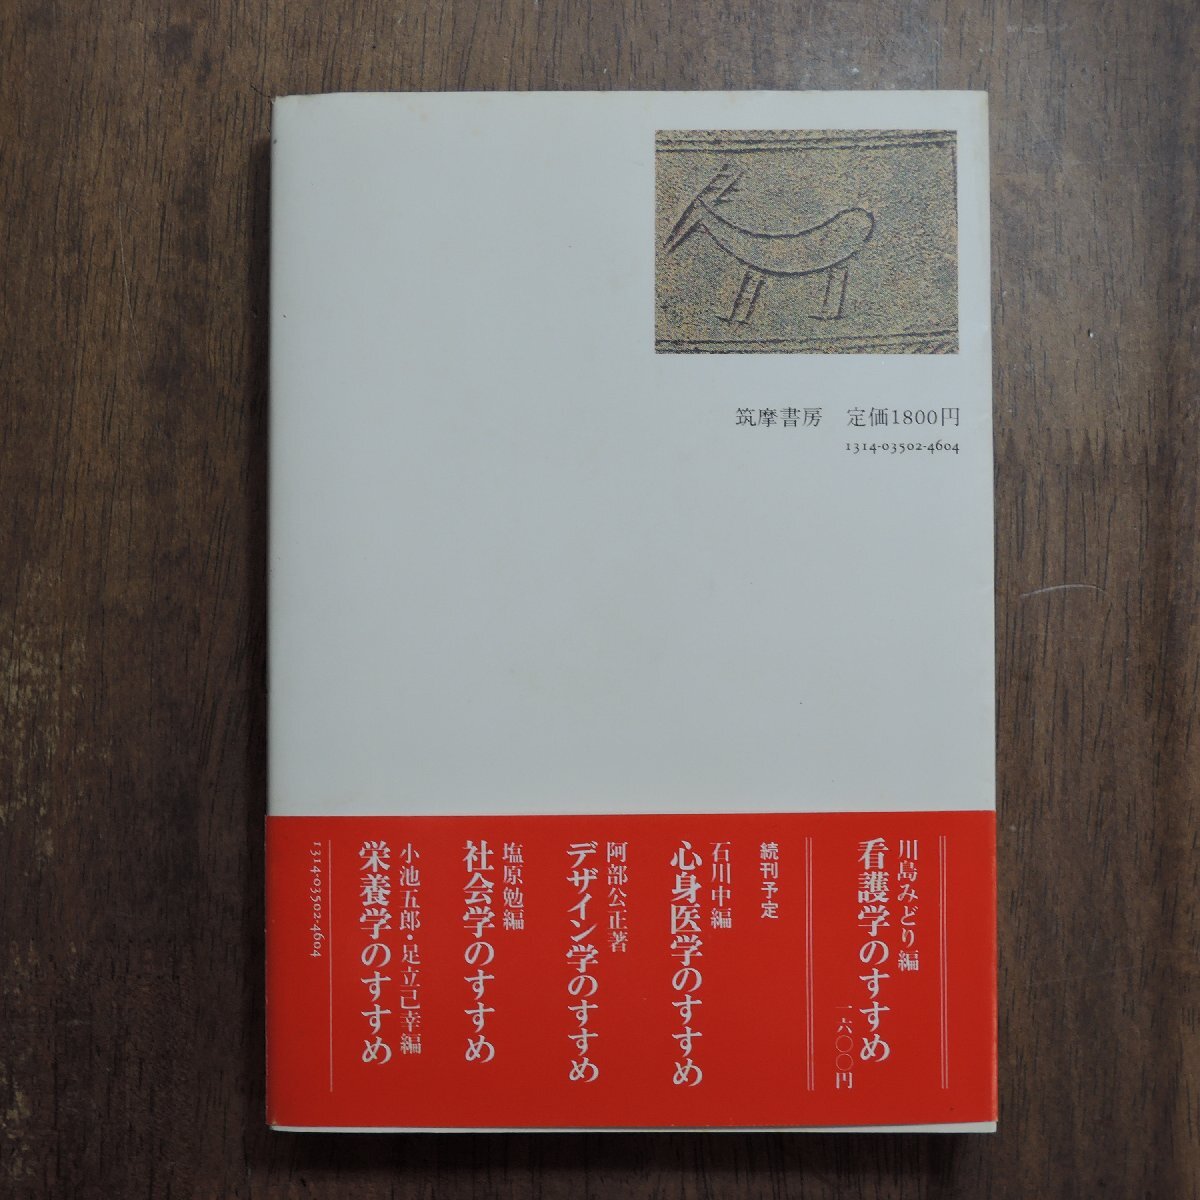 * religious studies. ... on rice field ..* Yanagawa . one compilation .. bookstore 1985 year the first version 